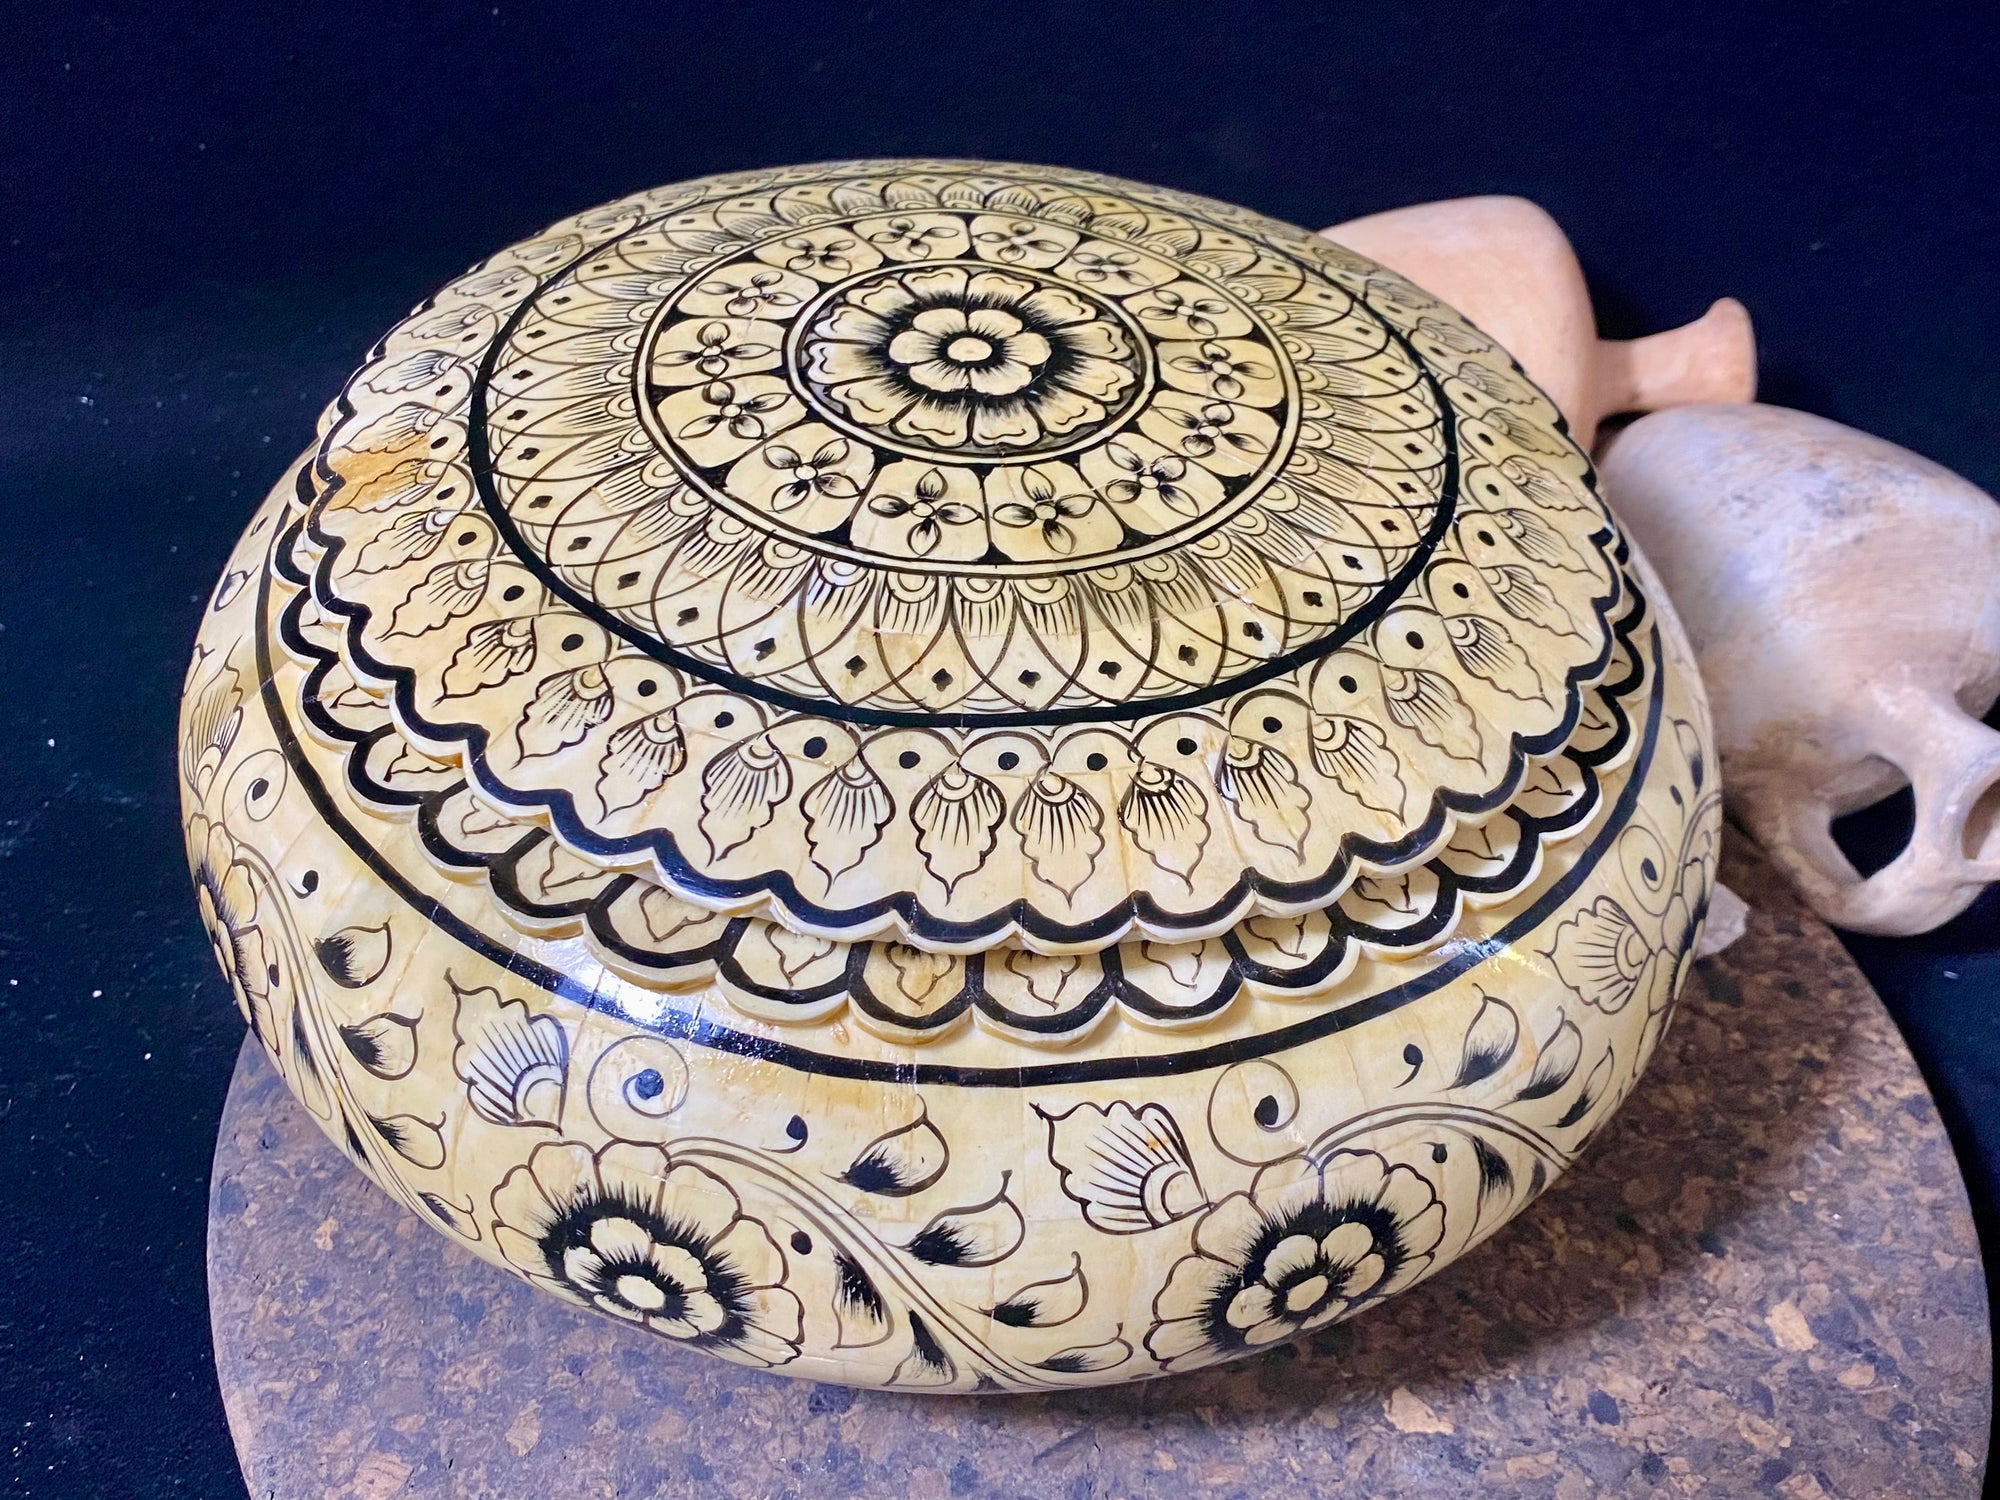 A beautiful low oval lidded bowl or box, traditionally called an opium pot because of its shape. Crafted from hand shaped panels of camel bone over wood, then hand painted. Hand made in Rajasthan, India. Measurements: diameter 24.5 cm, height 10 cm.